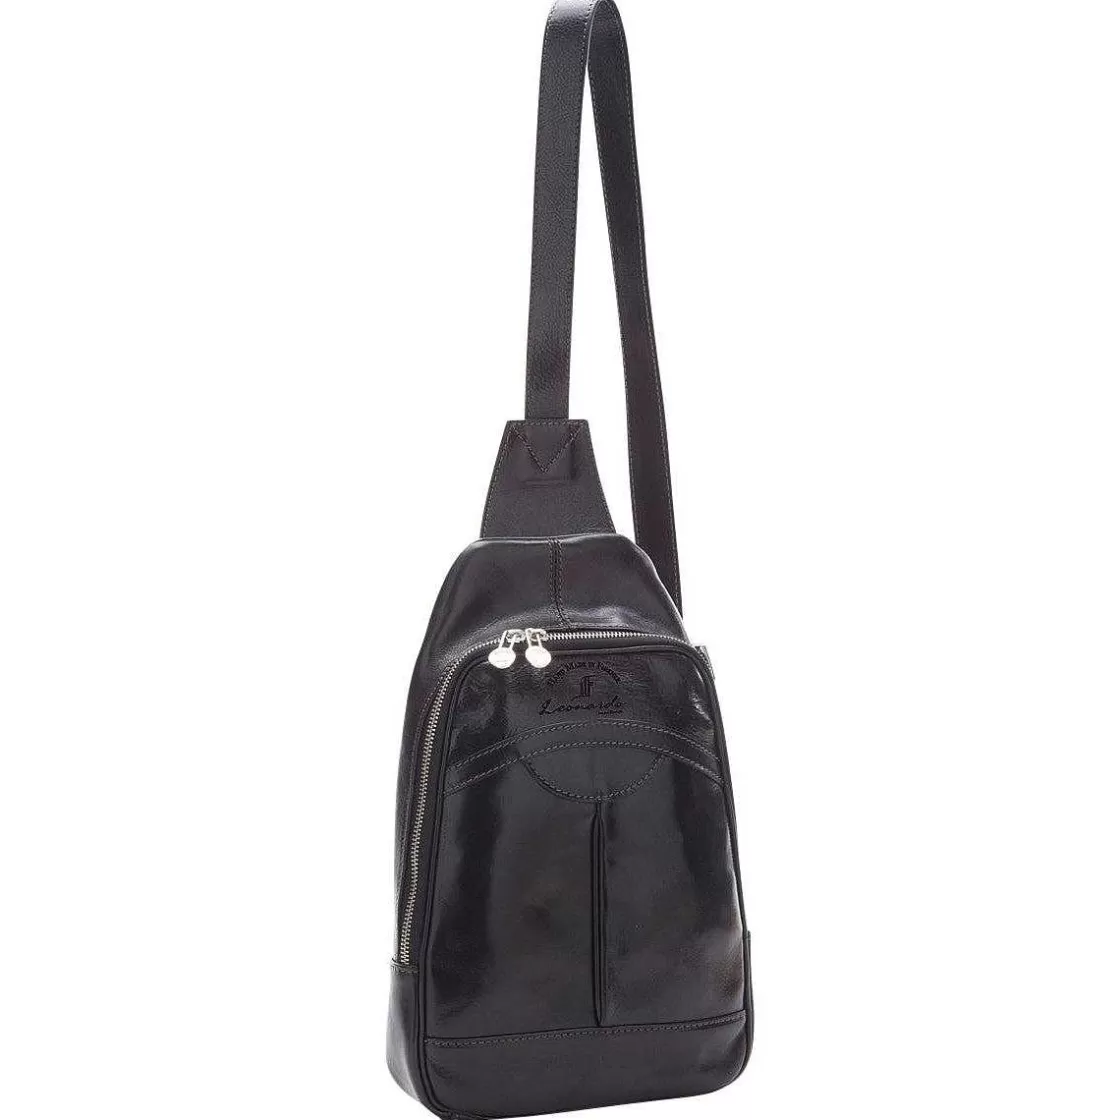 Leonardo Large Deluxe Bum Bag In Leather Full Grain With Zip And Adjustable Shoulder Strap Available In Various Colours Cheap